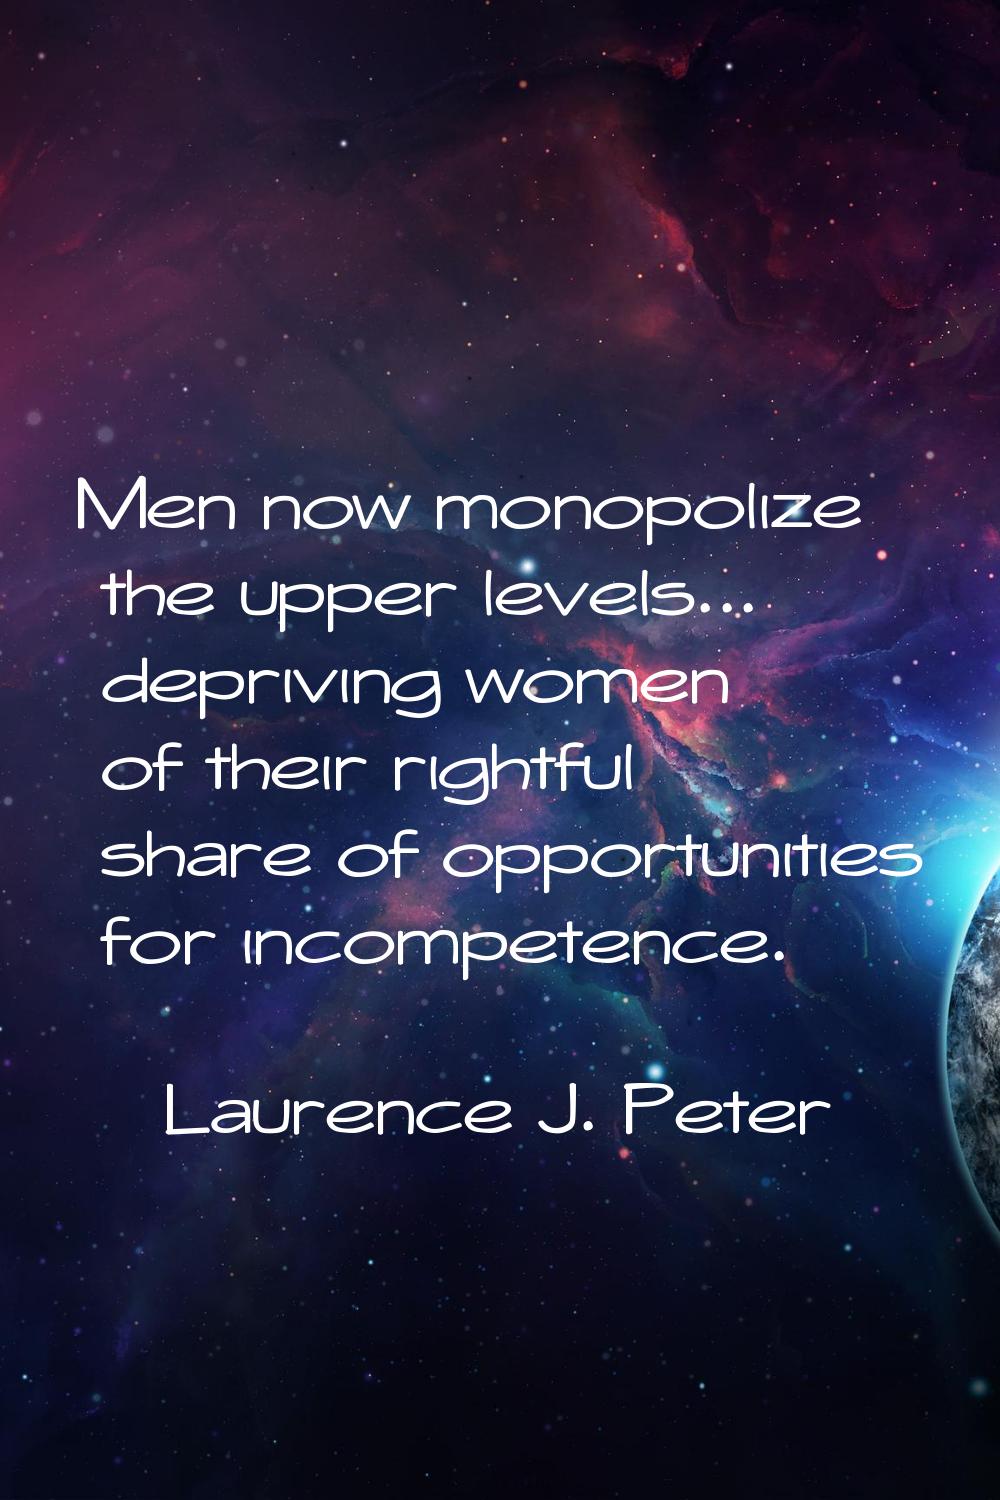 Men now monopolize the upper levels... depriving women of their rightful share of opportunities for